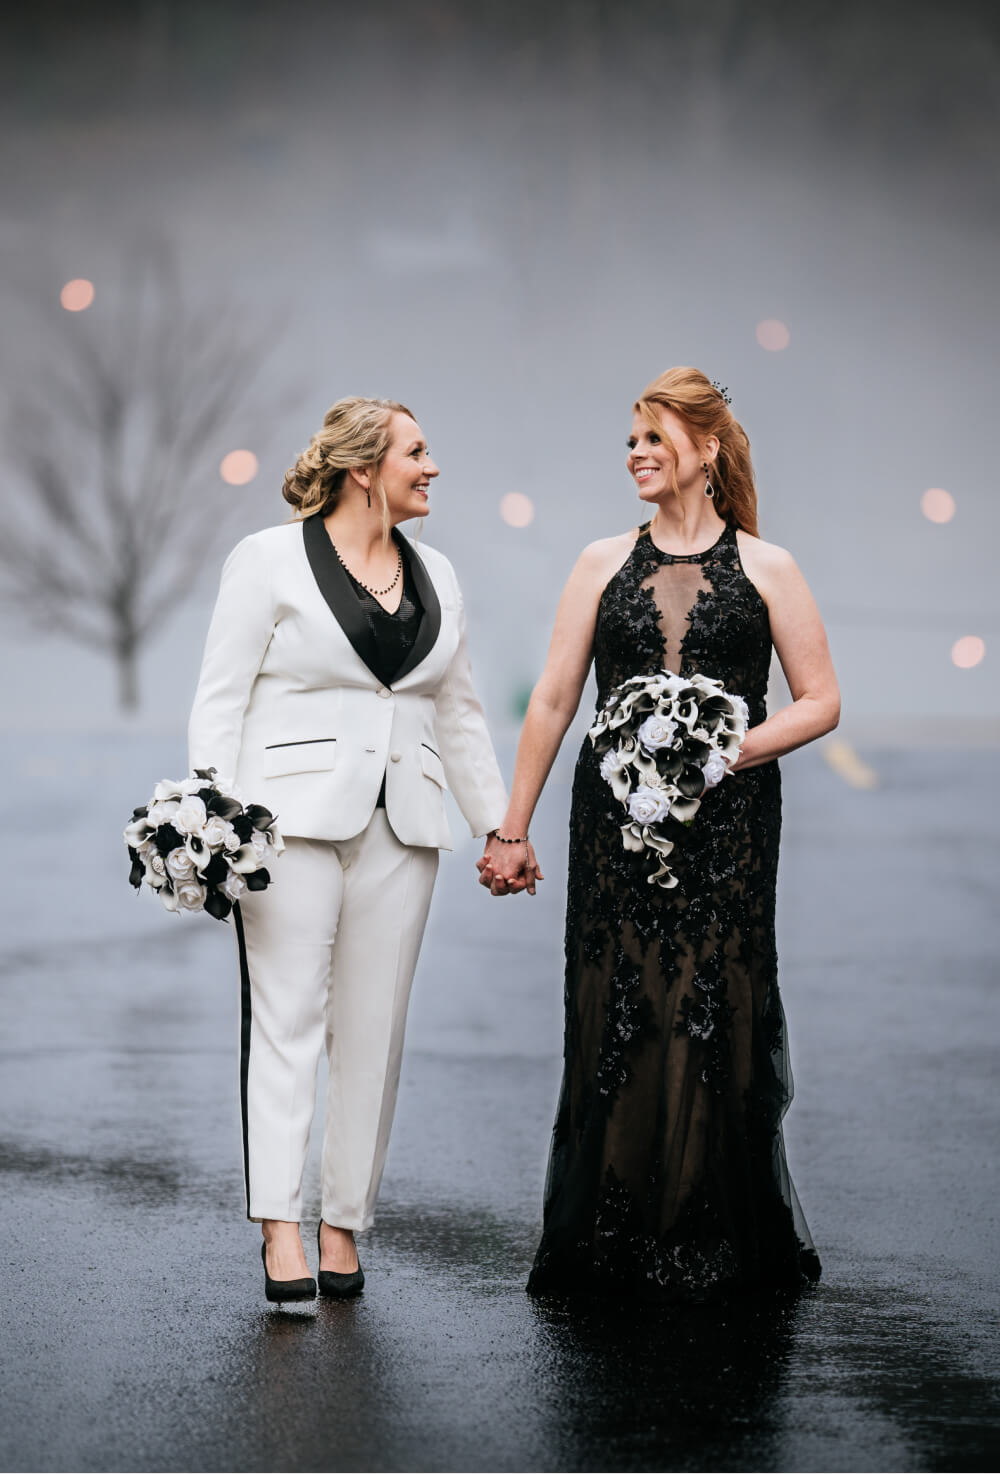 Two brides, one in a white suit and the other in an elegant black gown, holding hands and smiling at each other with a soft, misty background.